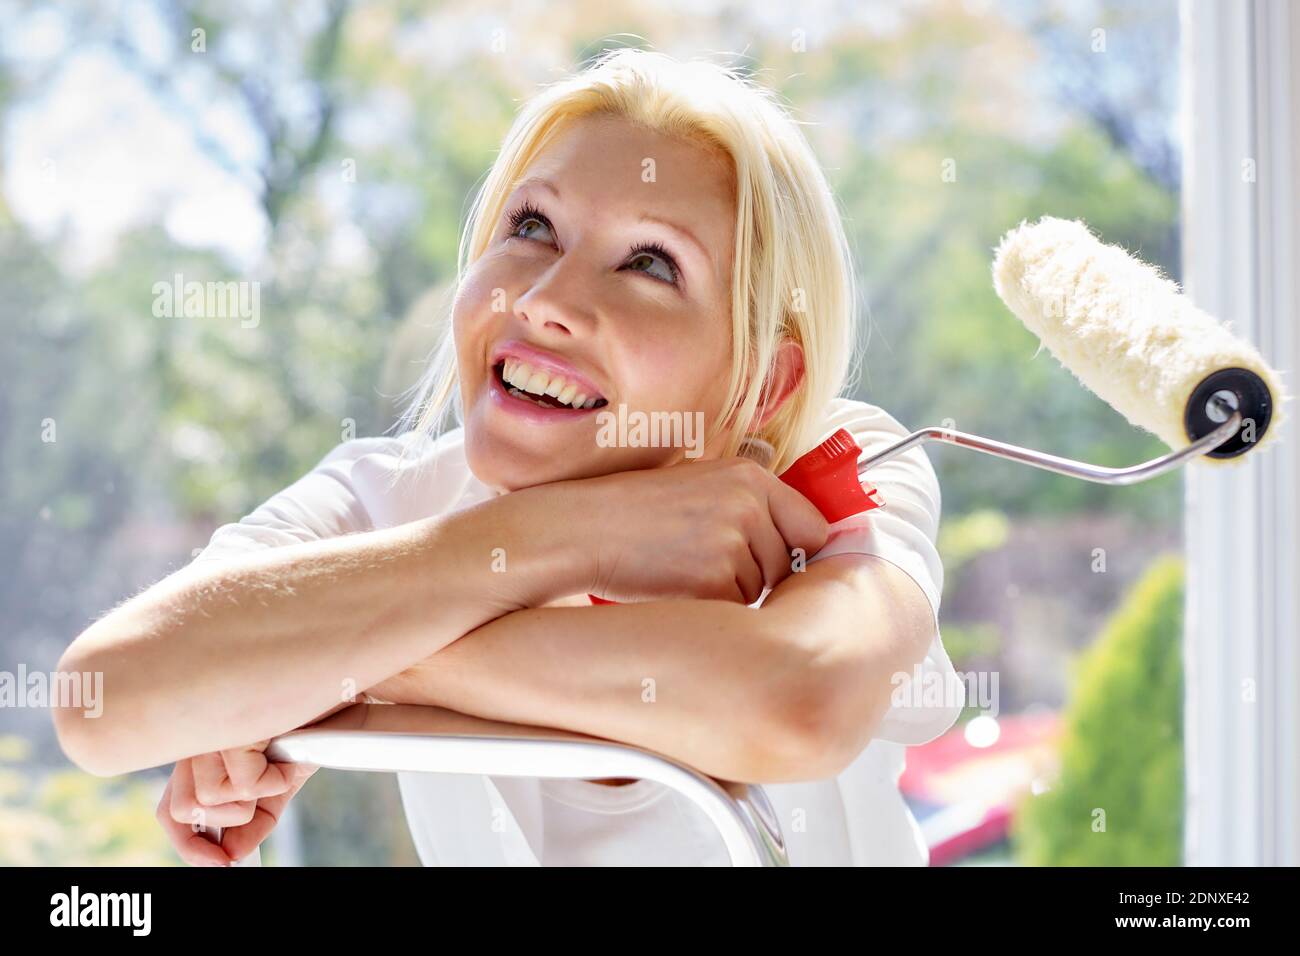 Attractive woman decorating Stock Photo